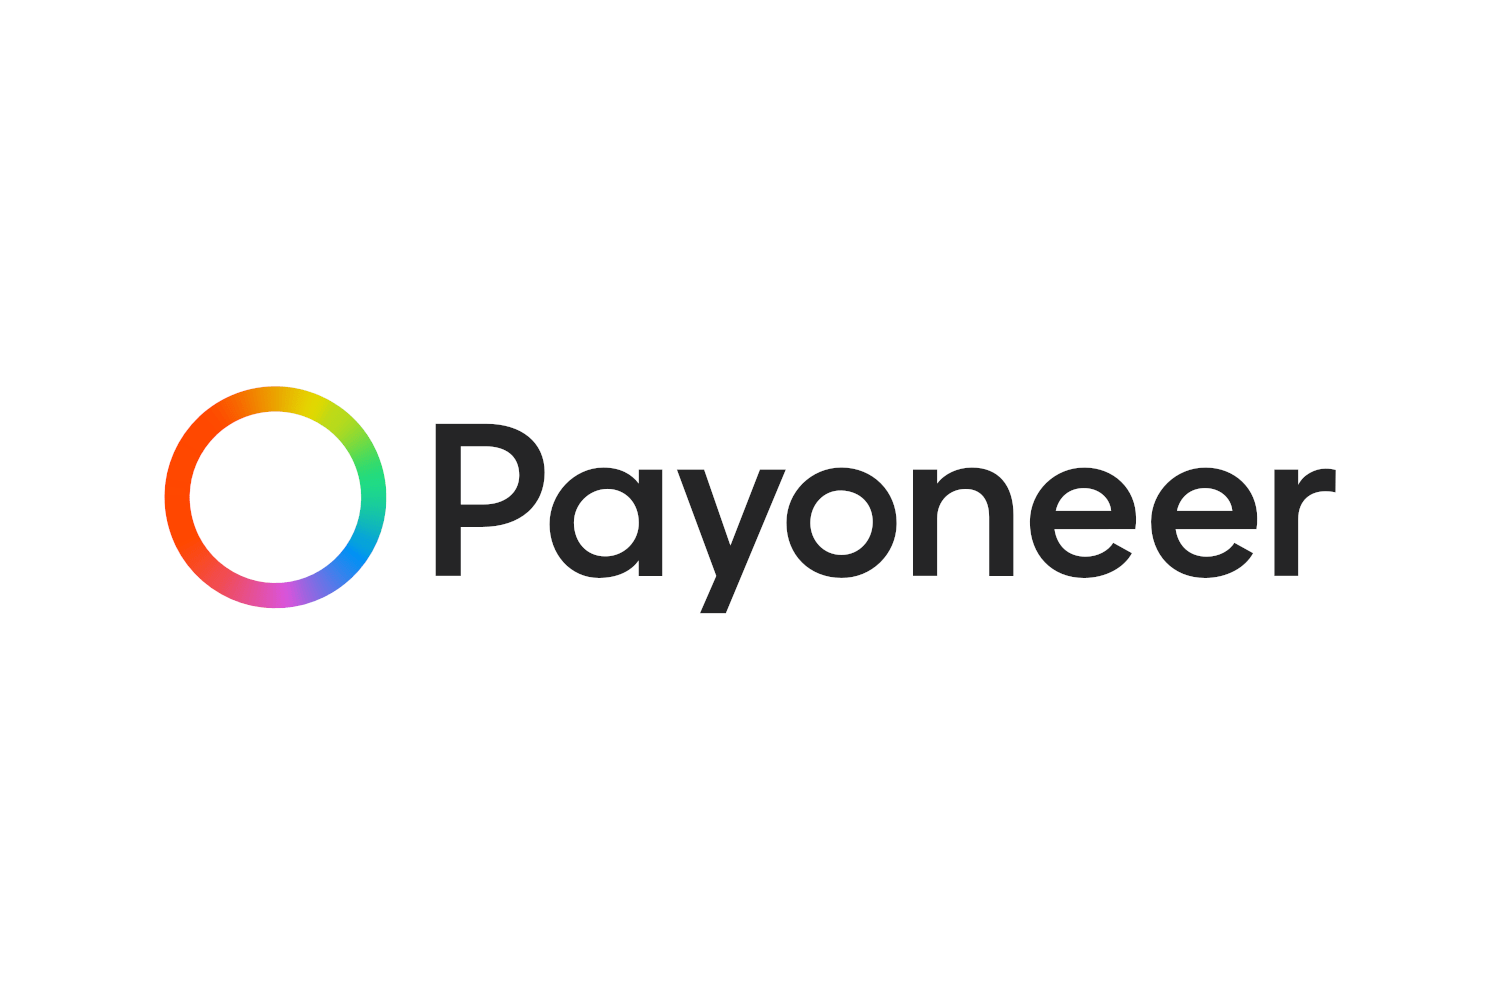 Build a global gaming business with Payoneer